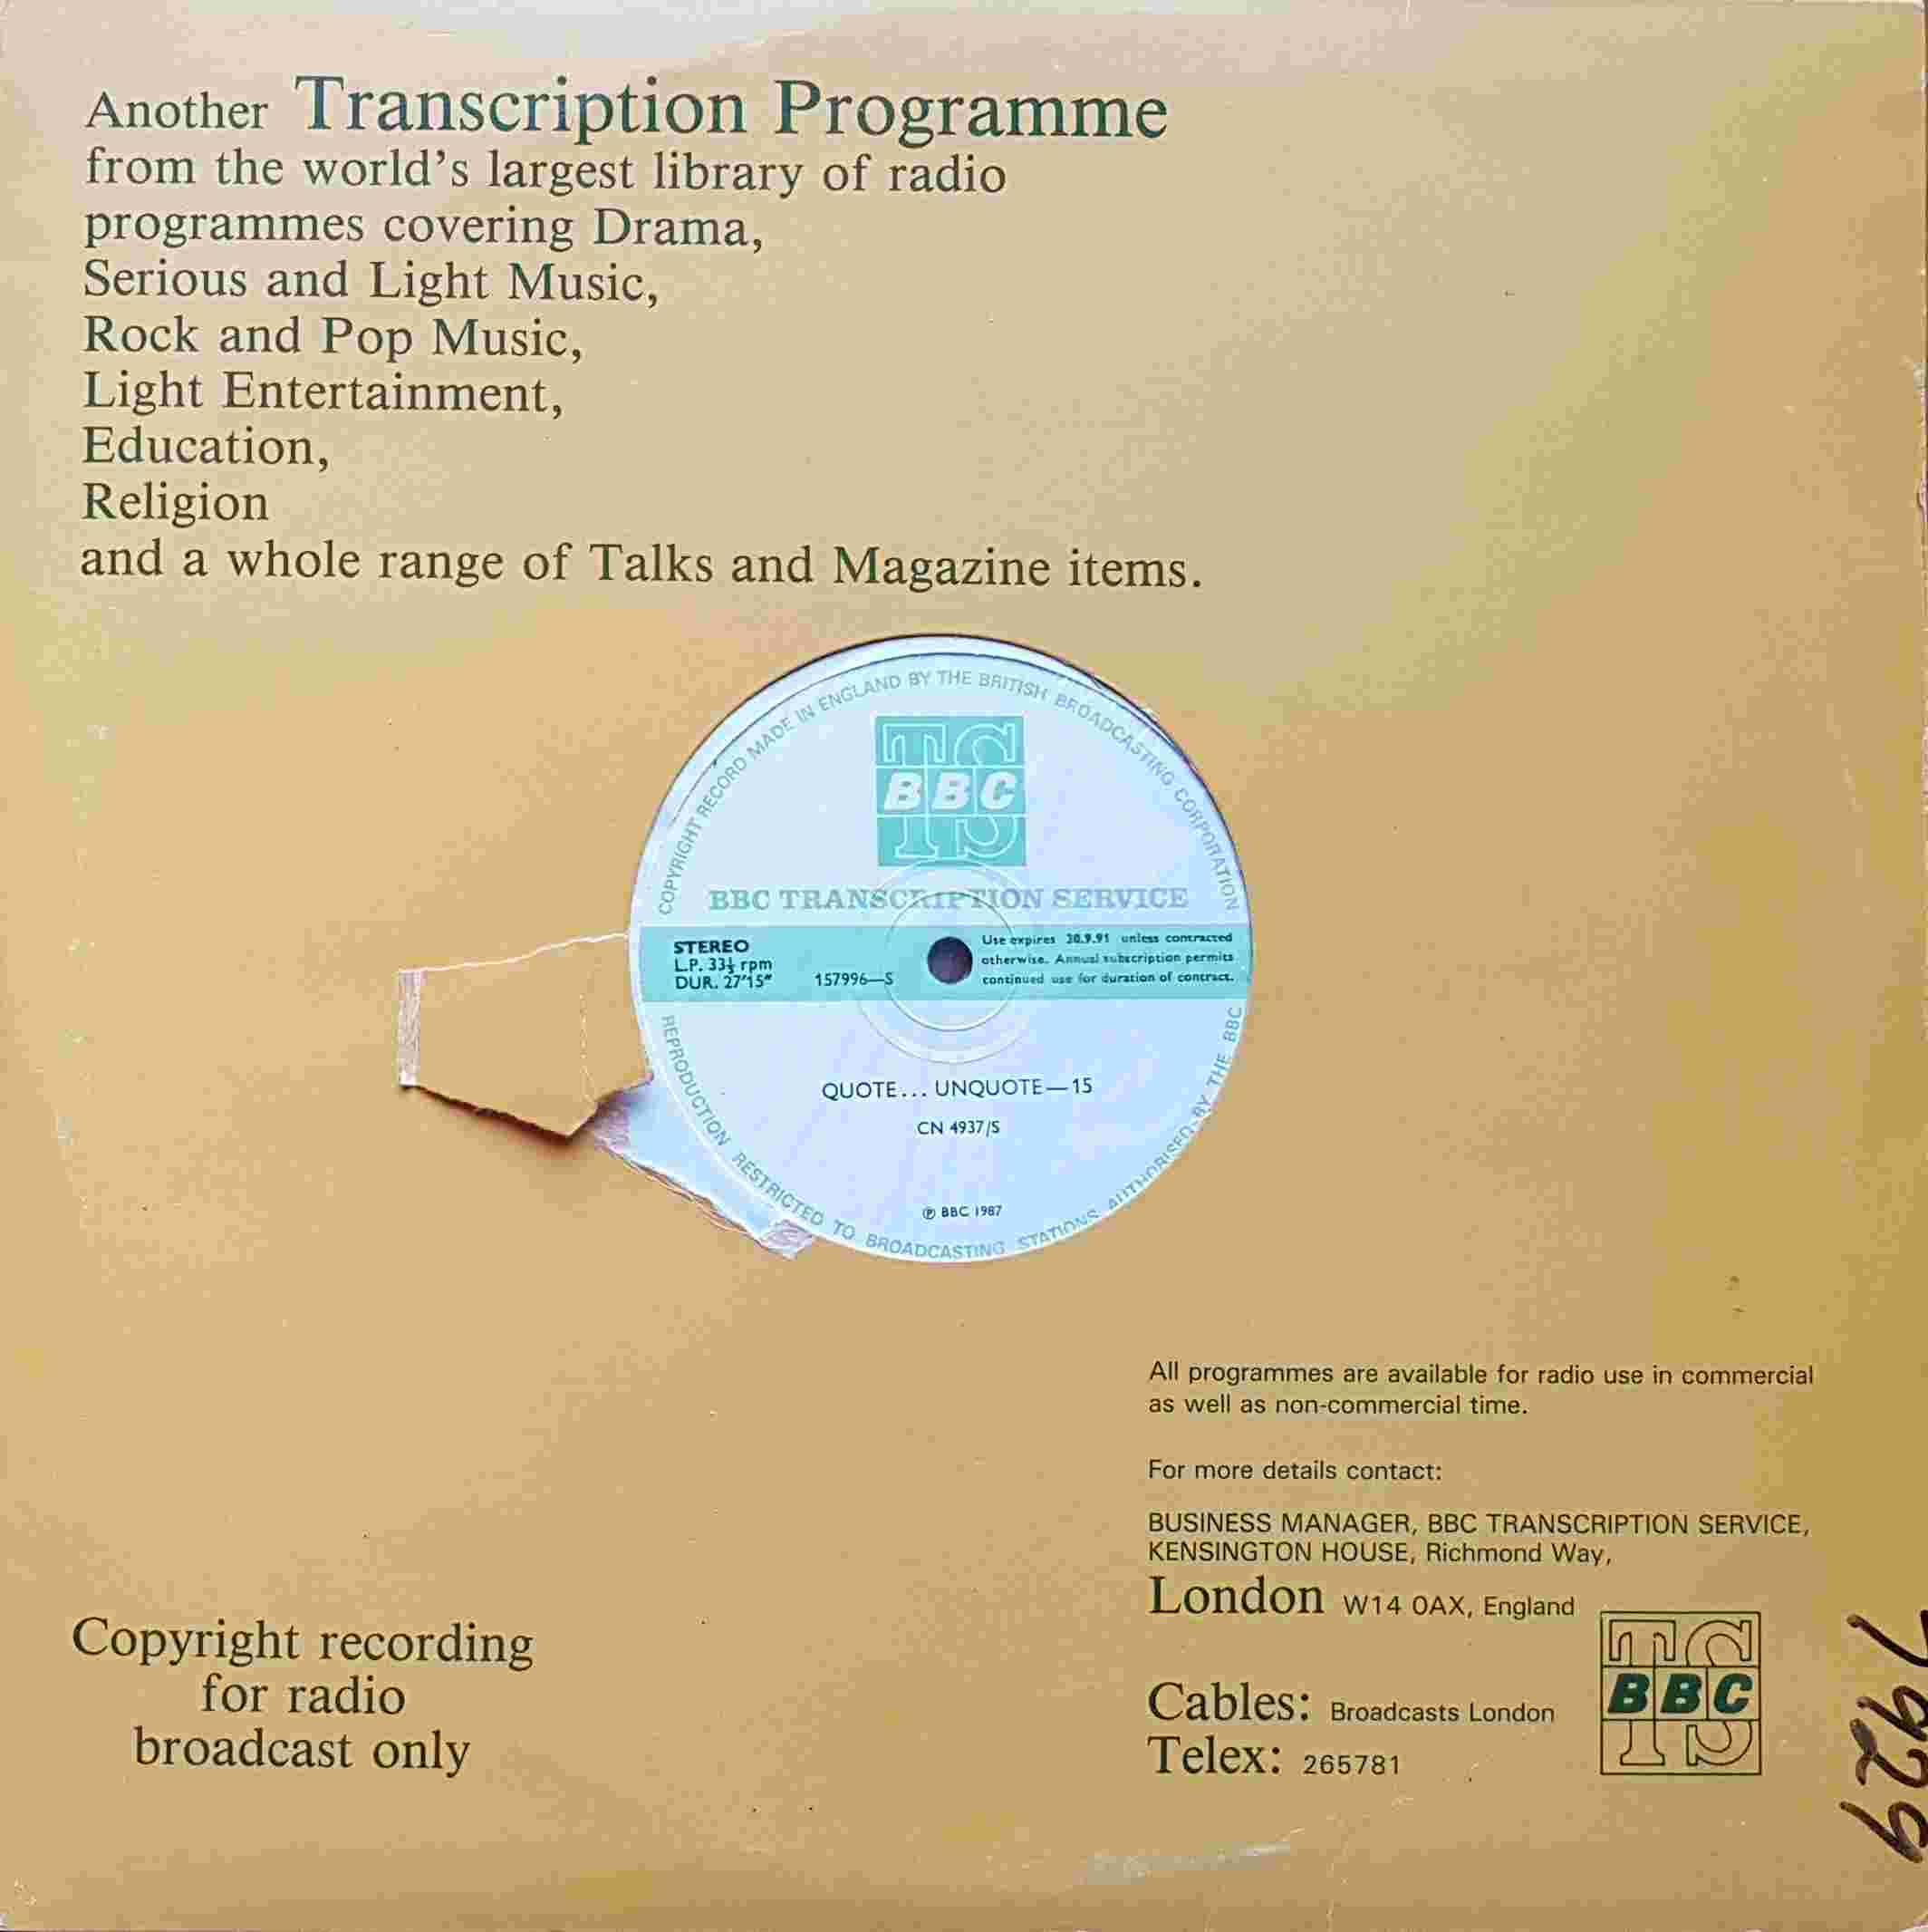 Picture of CN 4937 S 8 Quote ... unquote - 15 & 16 by artist Unknown from the BBC albums - Records and Tapes library